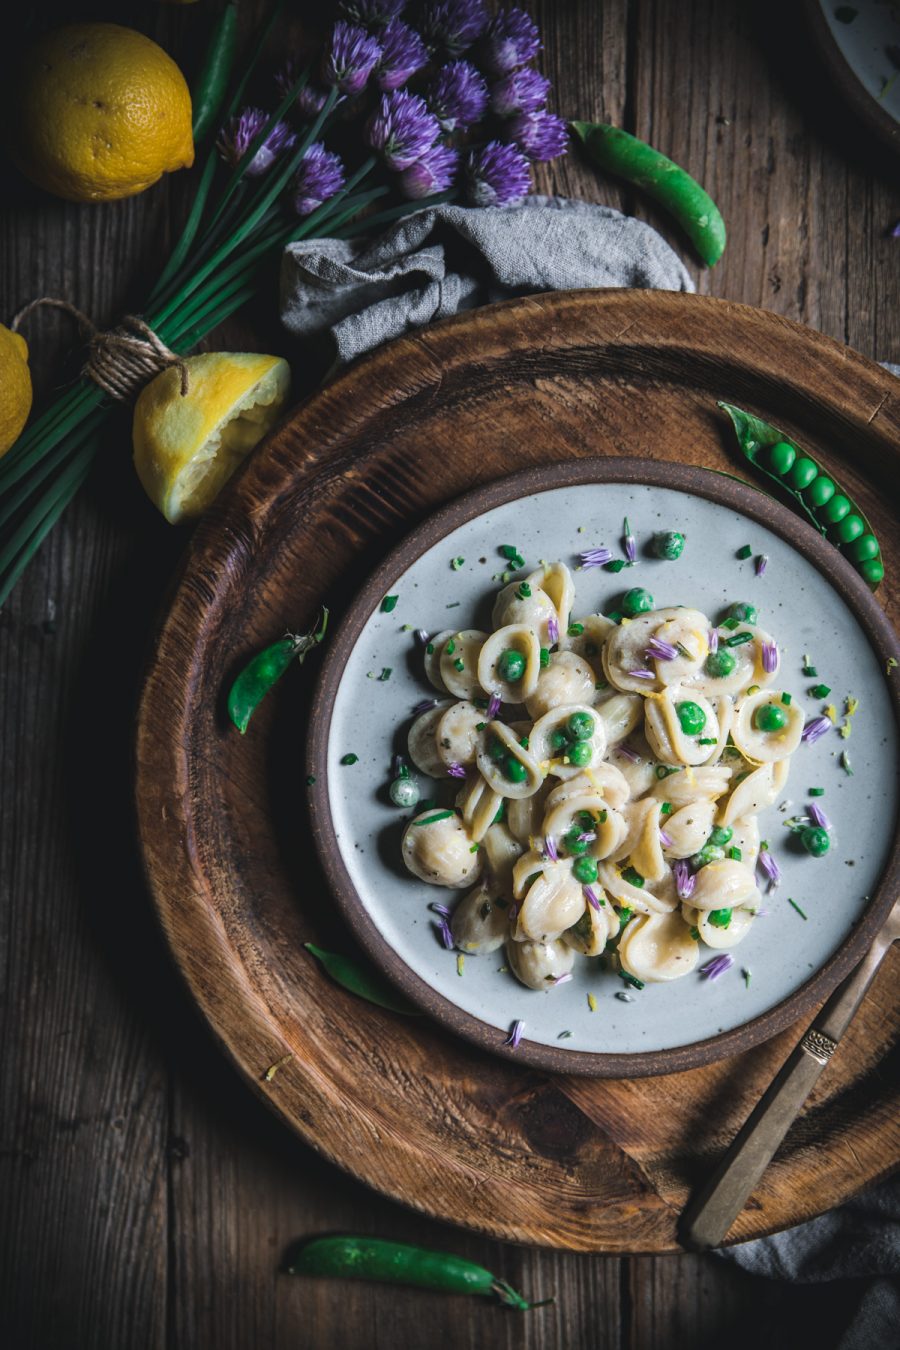 Chive and Chicken Orecchiette in a Rosemary Lemon Sauce